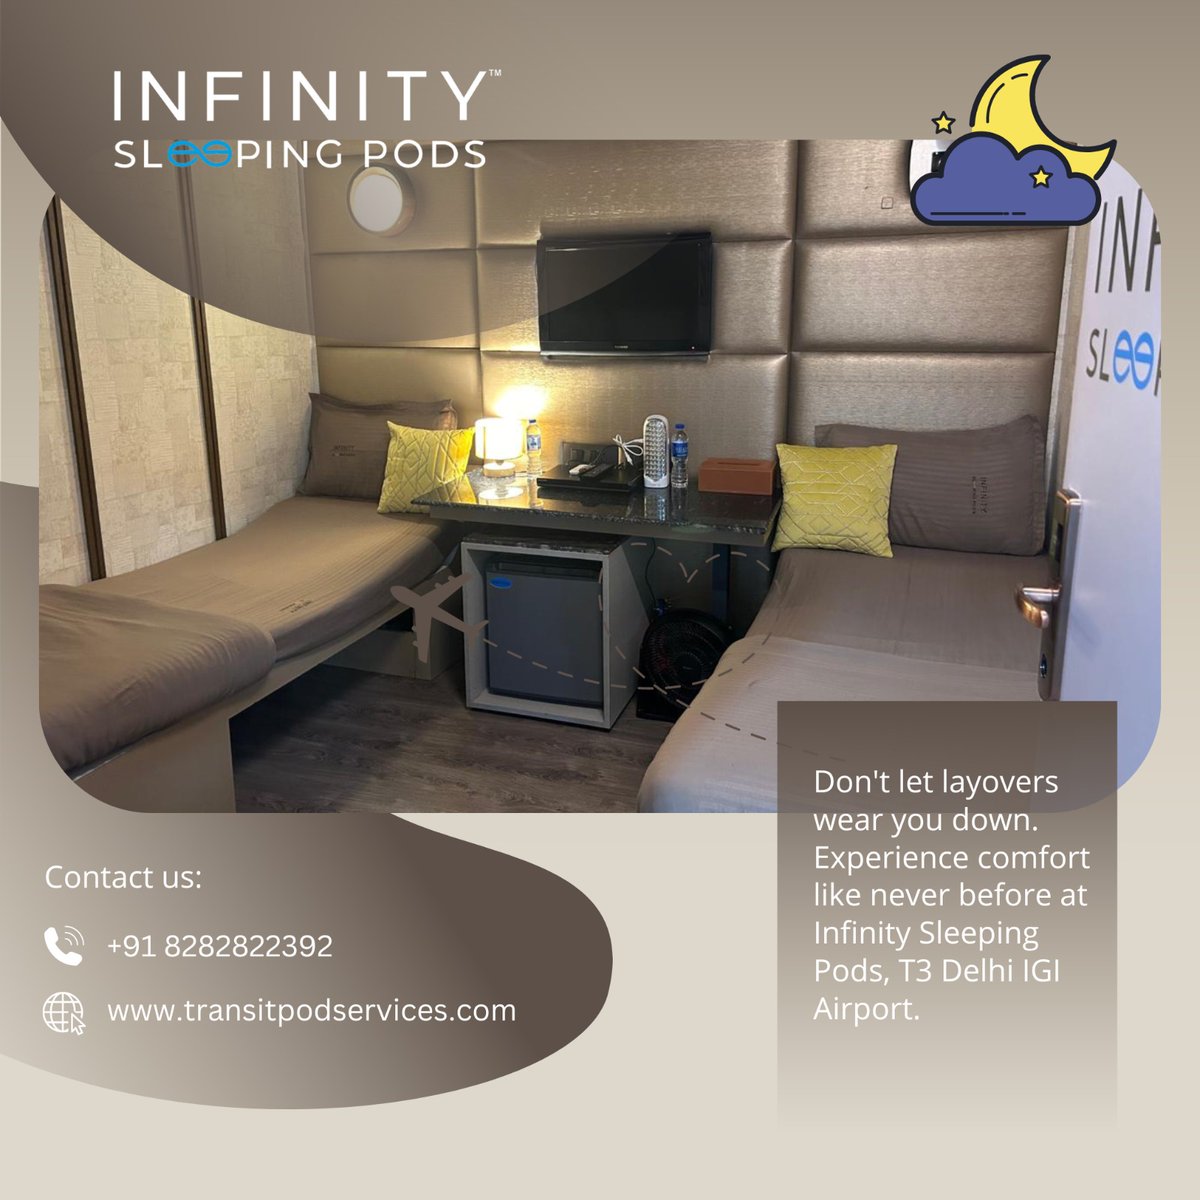 Step into luxury with Infinity sleeping pods—experience ultimate comfort and relaxation on your journey to dreamland.
.
.
.
#indiragandhiinternationalairport #delhi #hospitality #travelling #airport #igiairport #newdelhi #travel #terminal #hotels #airplane #sleepingpods #hotel